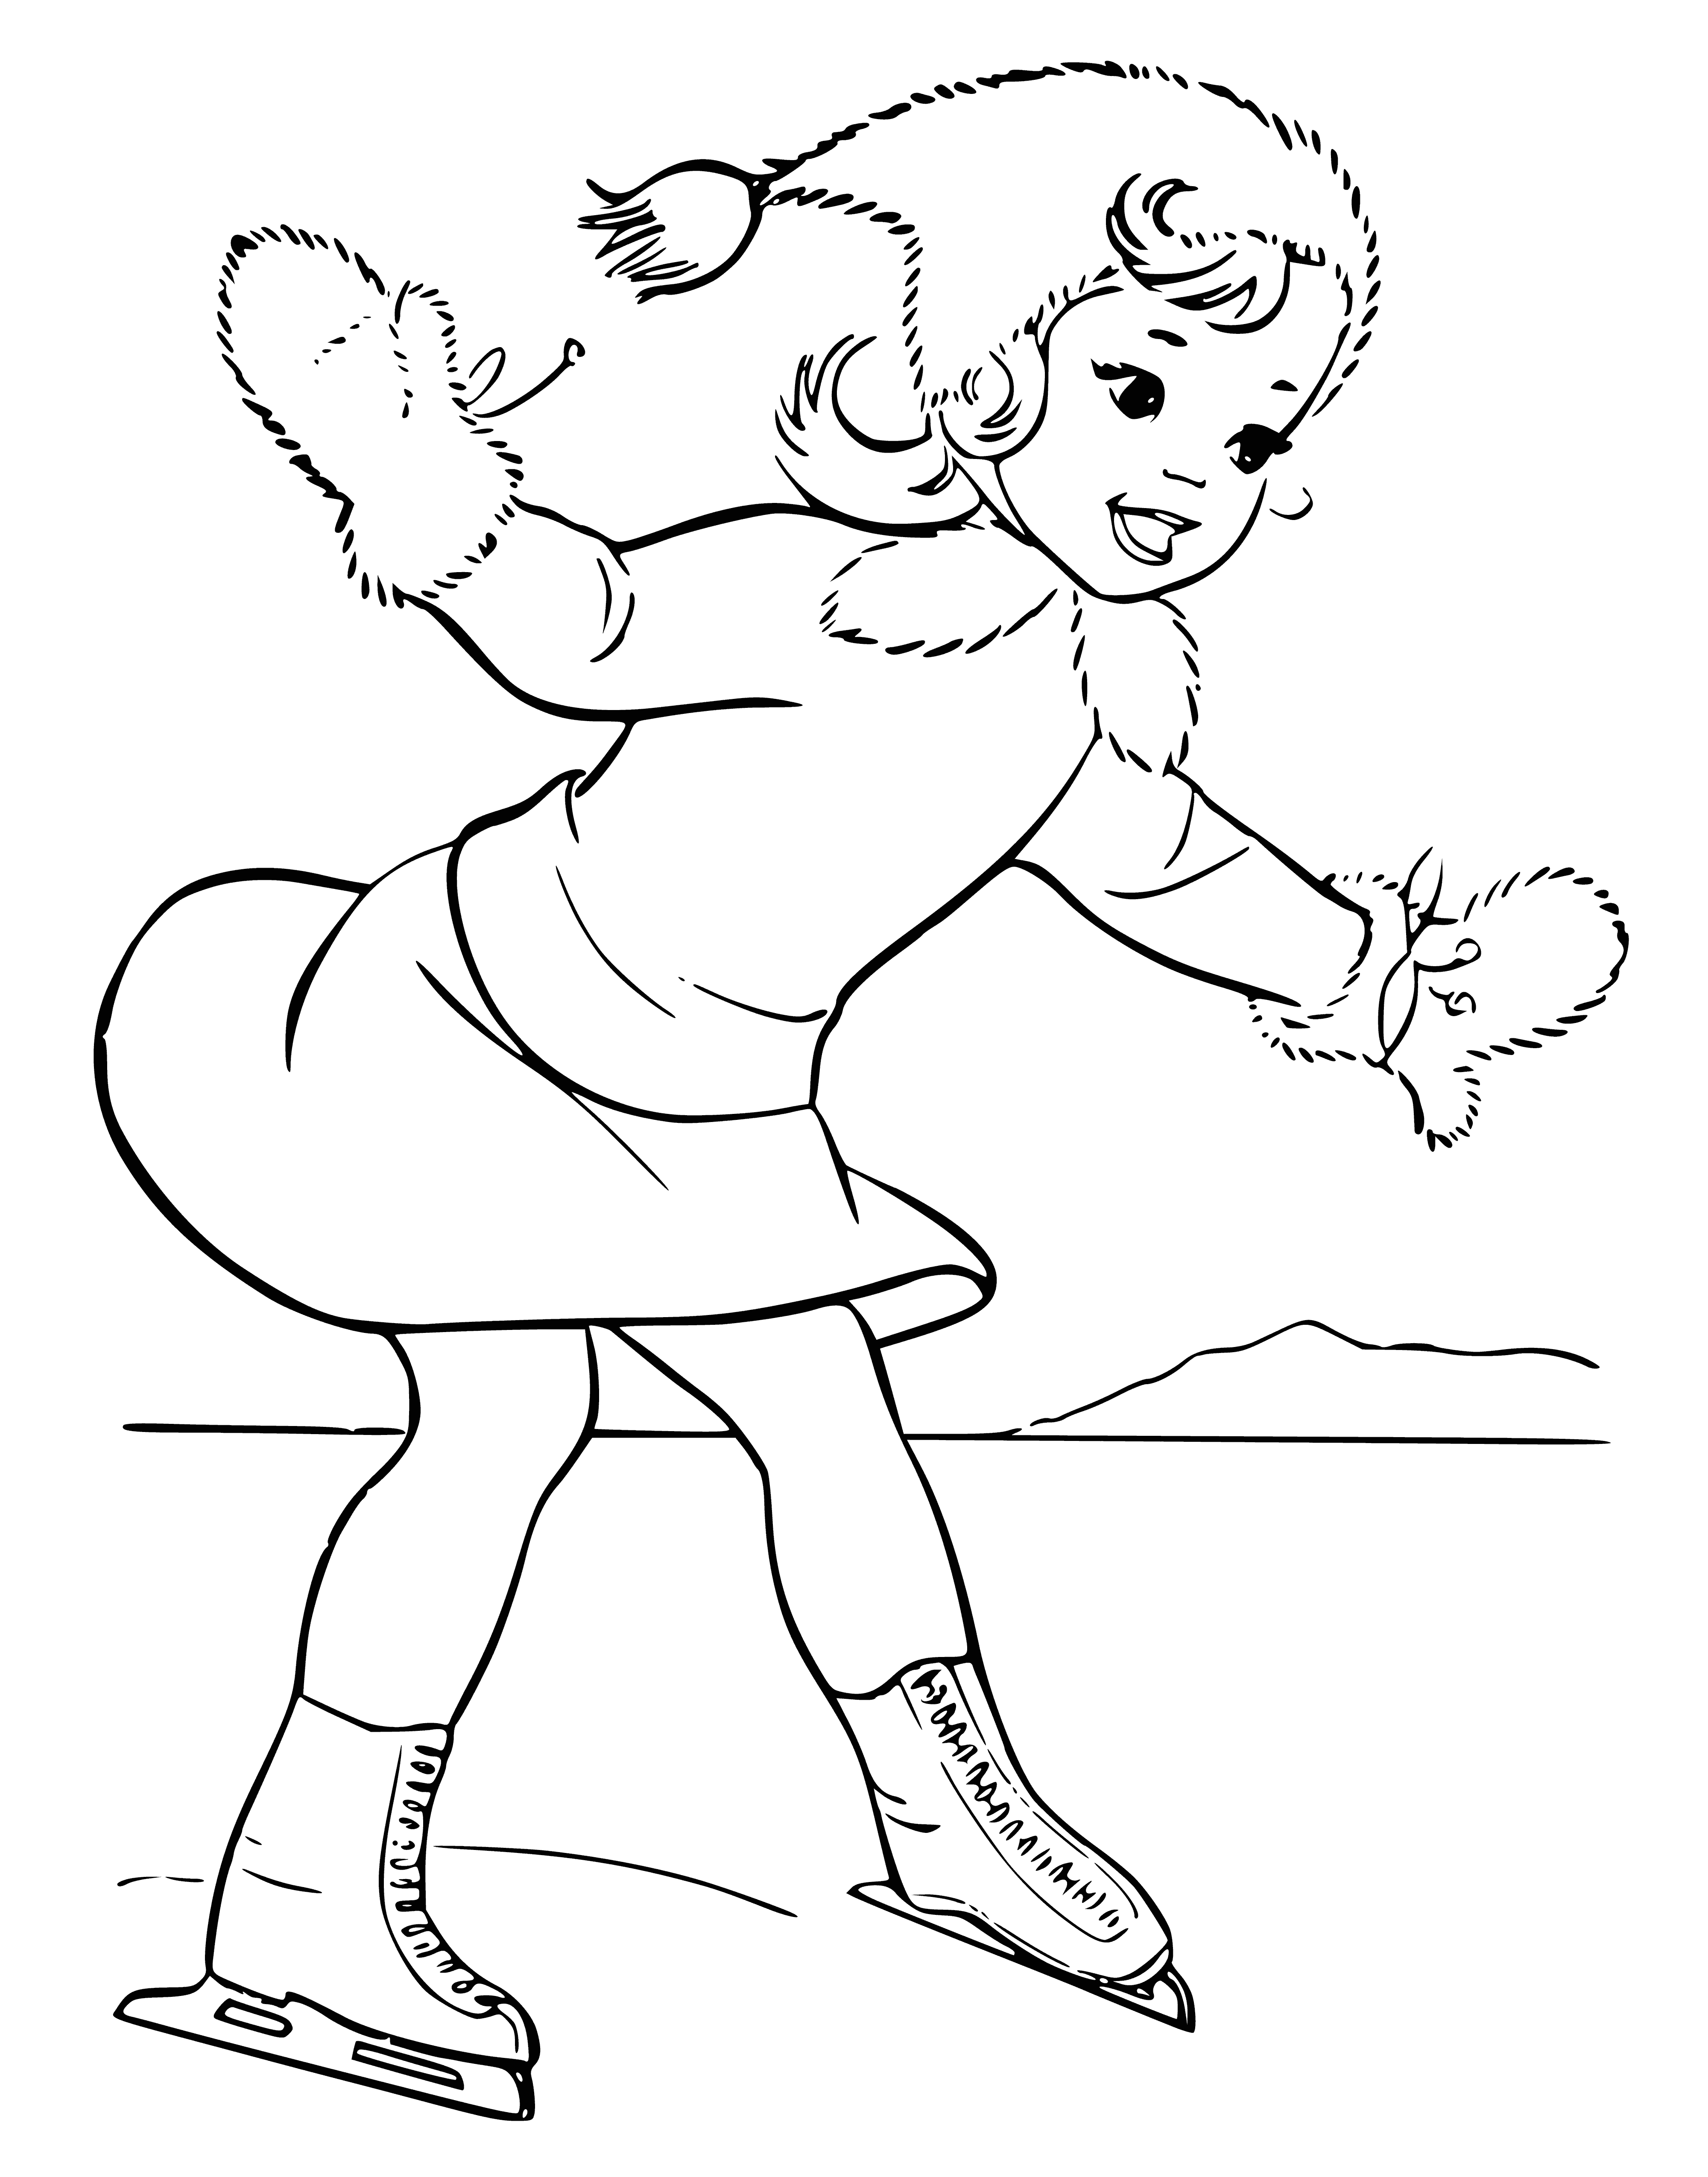 coloring page: Girl skates on frozen pond wearing pink dress and green scarf, hair blowing in wind. She looks happy and excited. #winterwonderland